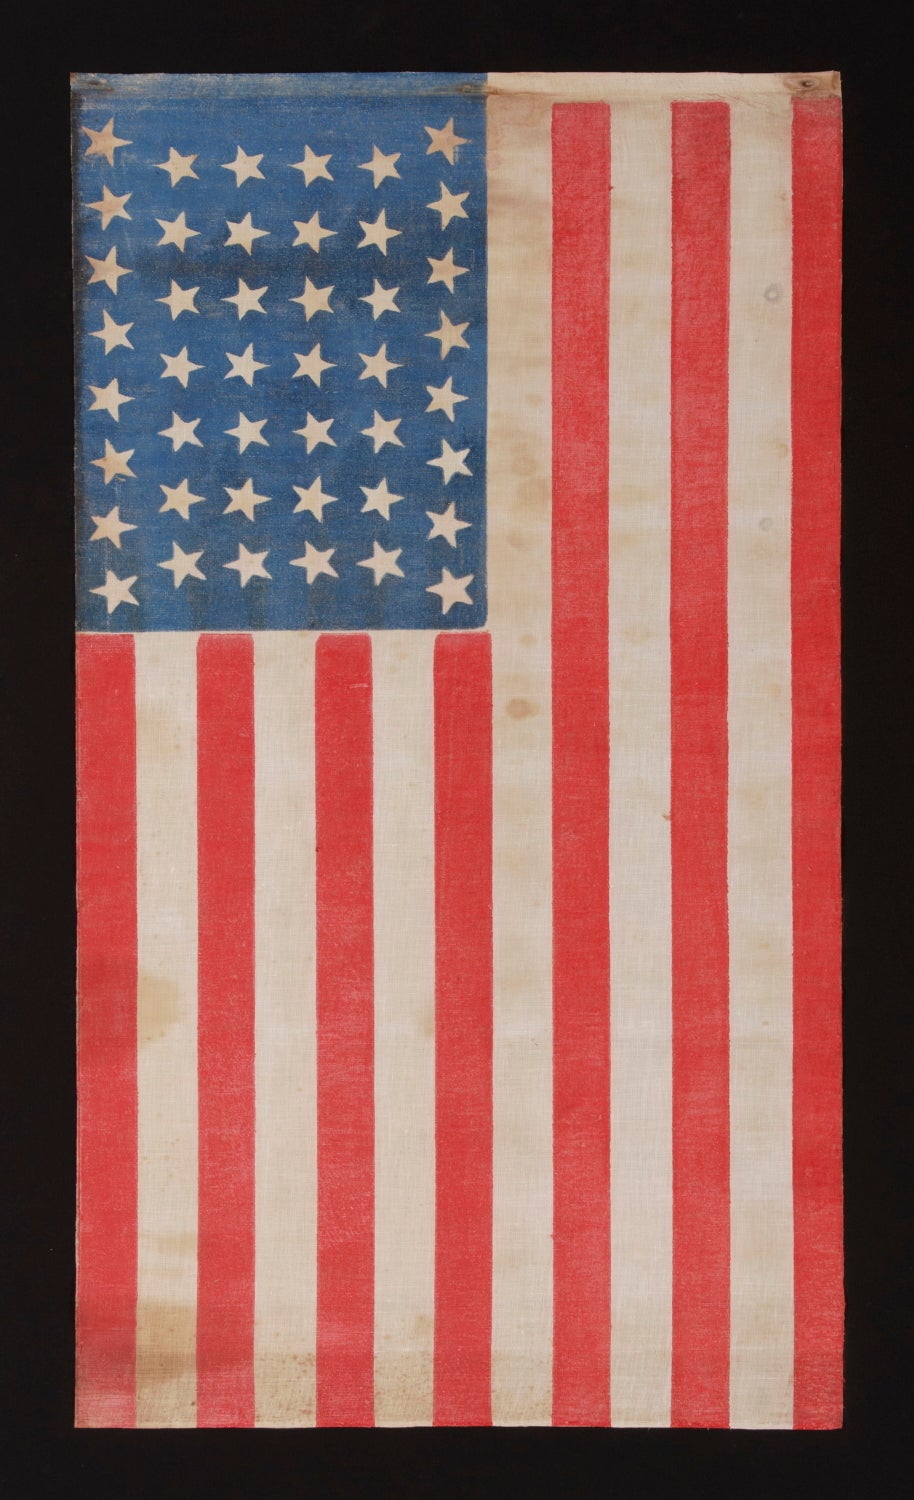 American 44 Star Flag with Dancing or Tumbling Stars in an Hourglass Formation